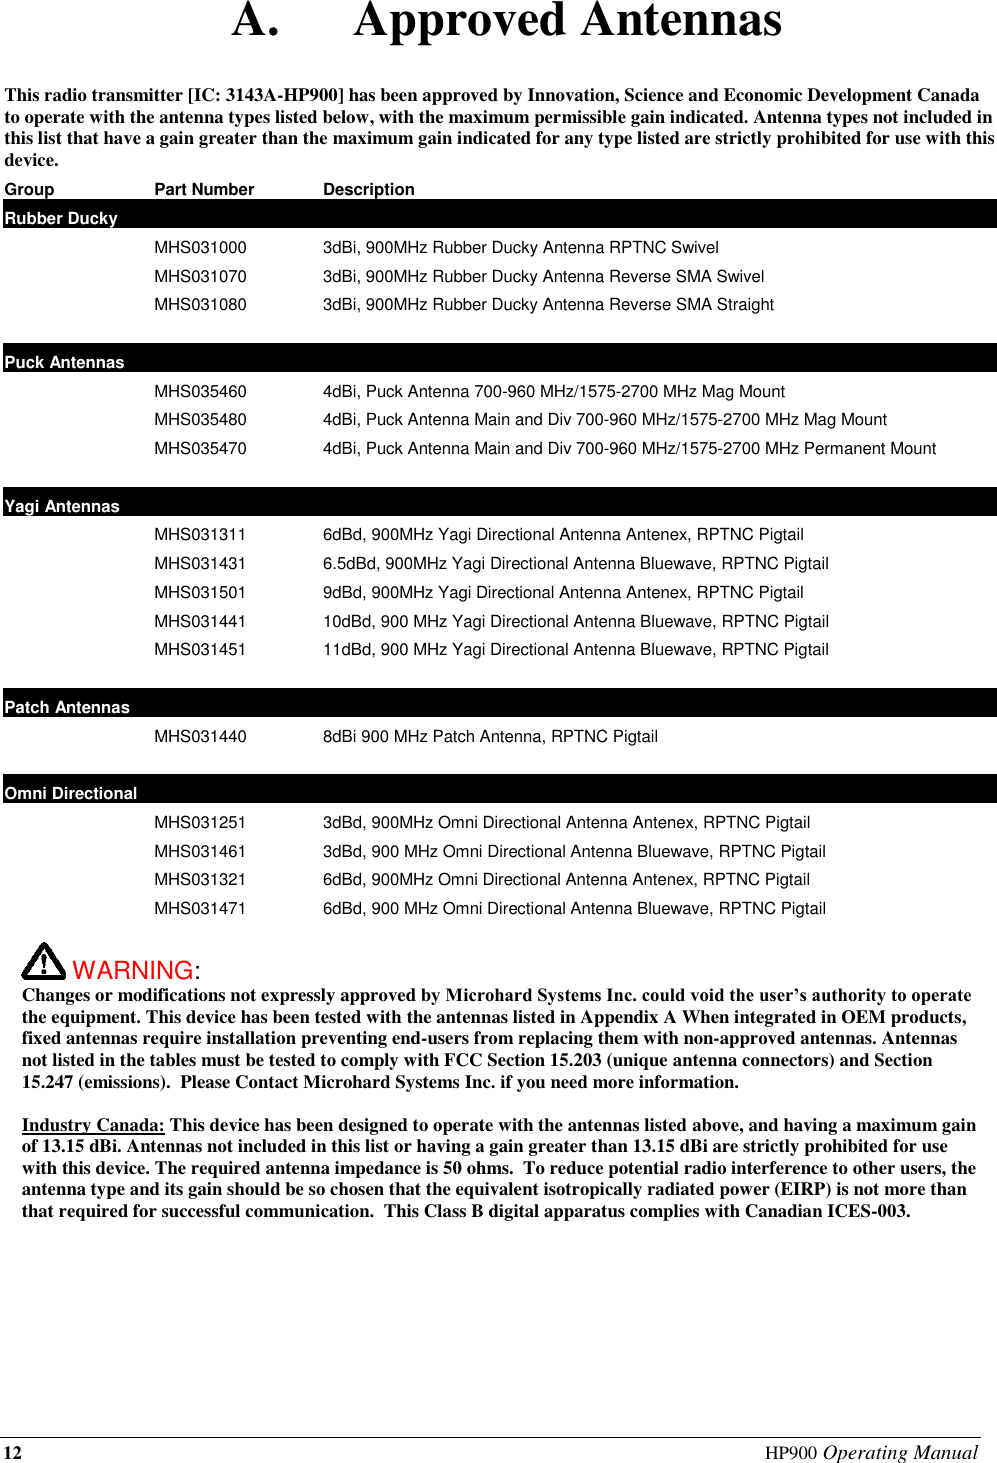 12  HP900 Operating Manual A. Approved Antennas  This radio transmitter [IC: 3143A-HP900] has been approved by Innovation, Science and Economic Development Canada to operate with the antenna types listed below, with the maximum permissible gain indicated. Antenna types not included in this list that have a gain greater than the maximum gain indicated for any type listed are strictly prohibited for use with this device. Group Part Number Description Rubber Ducky      MHS031000 3dBi, 900MHz Rubber Ducky Antenna RPTNC Swivel  MHS031070 3dBi, 900MHz Rubber Ducky Antenna Reverse SMA Swivel  MHS031080 3dBi, 900MHz Rubber Ducky Antenna Reverse SMA Straight    Puck Antennas      MHS035460  4dBi, Puck Antenna 700-960 MHz/1575-2700 MHz Mag Mount   MHS035480 4dBi, Puck Antenna Main and Div 700-960 MHz/1575-2700 MHz Mag Mount  MHS035470 4dBi, Puck Antenna Main and Div 700-960 MHz/1575-2700 MHz Permanent Mount    Yagi Antennas      MHS031311 6dBd, 900MHz Yagi Directional Antenna Antenex, RPTNC Pigtail  MHS031431 6.5dBd, 900MHz Yagi Directional Antenna Bluewave, RPTNC Pigtail  MHS031501 9dBd, 900MHz Yagi Directional Antenna Antenex, RPTNC Pigtail  MHS031441 10dBd, 900 MHz Yagi Directional Antenna Bluewave, RPTNC Pigtail  MHS031451 11dBd, 900 MHz Yagi Directional Antenna Bluewave, RPTNC Pigtail    Patch Antennas    MHS031440 8dBi 900 MHz Patch Antenna, RPTNC Pigtail    Omni Directional      MHS031251 3dBd, 900MHz Omni Directional Antenna Antenex, RPTNC Pigtail  MHS031461 3dBd, 900 MHz Omni Directional Antenna Bluewave, RPTNC Pigtail  MHS031321 6dBd, 900MHz Omni Directional Antenna Antenex, RPTNC Pigtail  MHS031471 6dBd, 900 MHz Omni Directional Antenna Bluewave, RPTNC Pigtail               WARNING:   Changes or modifications not expressly approved by Microhard Systems Inc. could void the user’s authority to operate the equipment. This device has been tested with the antennas listed in Appendix A When integrated in OEM products, fixed antennas require installation preventing end-users from replacing them with non-approved antennas. Antennas not listed in the tables must be tested to comply with FCC Section 15.203 (unique antenna connectors) and Section 15.247 (emissions).  Please Contact Microhard Systems Inc. if you need more information.  Industry Canada: This device has been designed to operate with the antennas listed above, and having a maximum gain of 13.15 dBi. Antennas not included in this list or having a gain greater than 13.15 dBi are strictly prohibited for use with this device. The required antenna impedance is 50 ohms.  To reduce potential radio interference to other users, the antenna type and its gain should be so chosen that the equivalent isotropically radiated power (EIRP) is not more than that required for successful communication.  This Class B digital apparatus complies with Canadian ICES-003.  